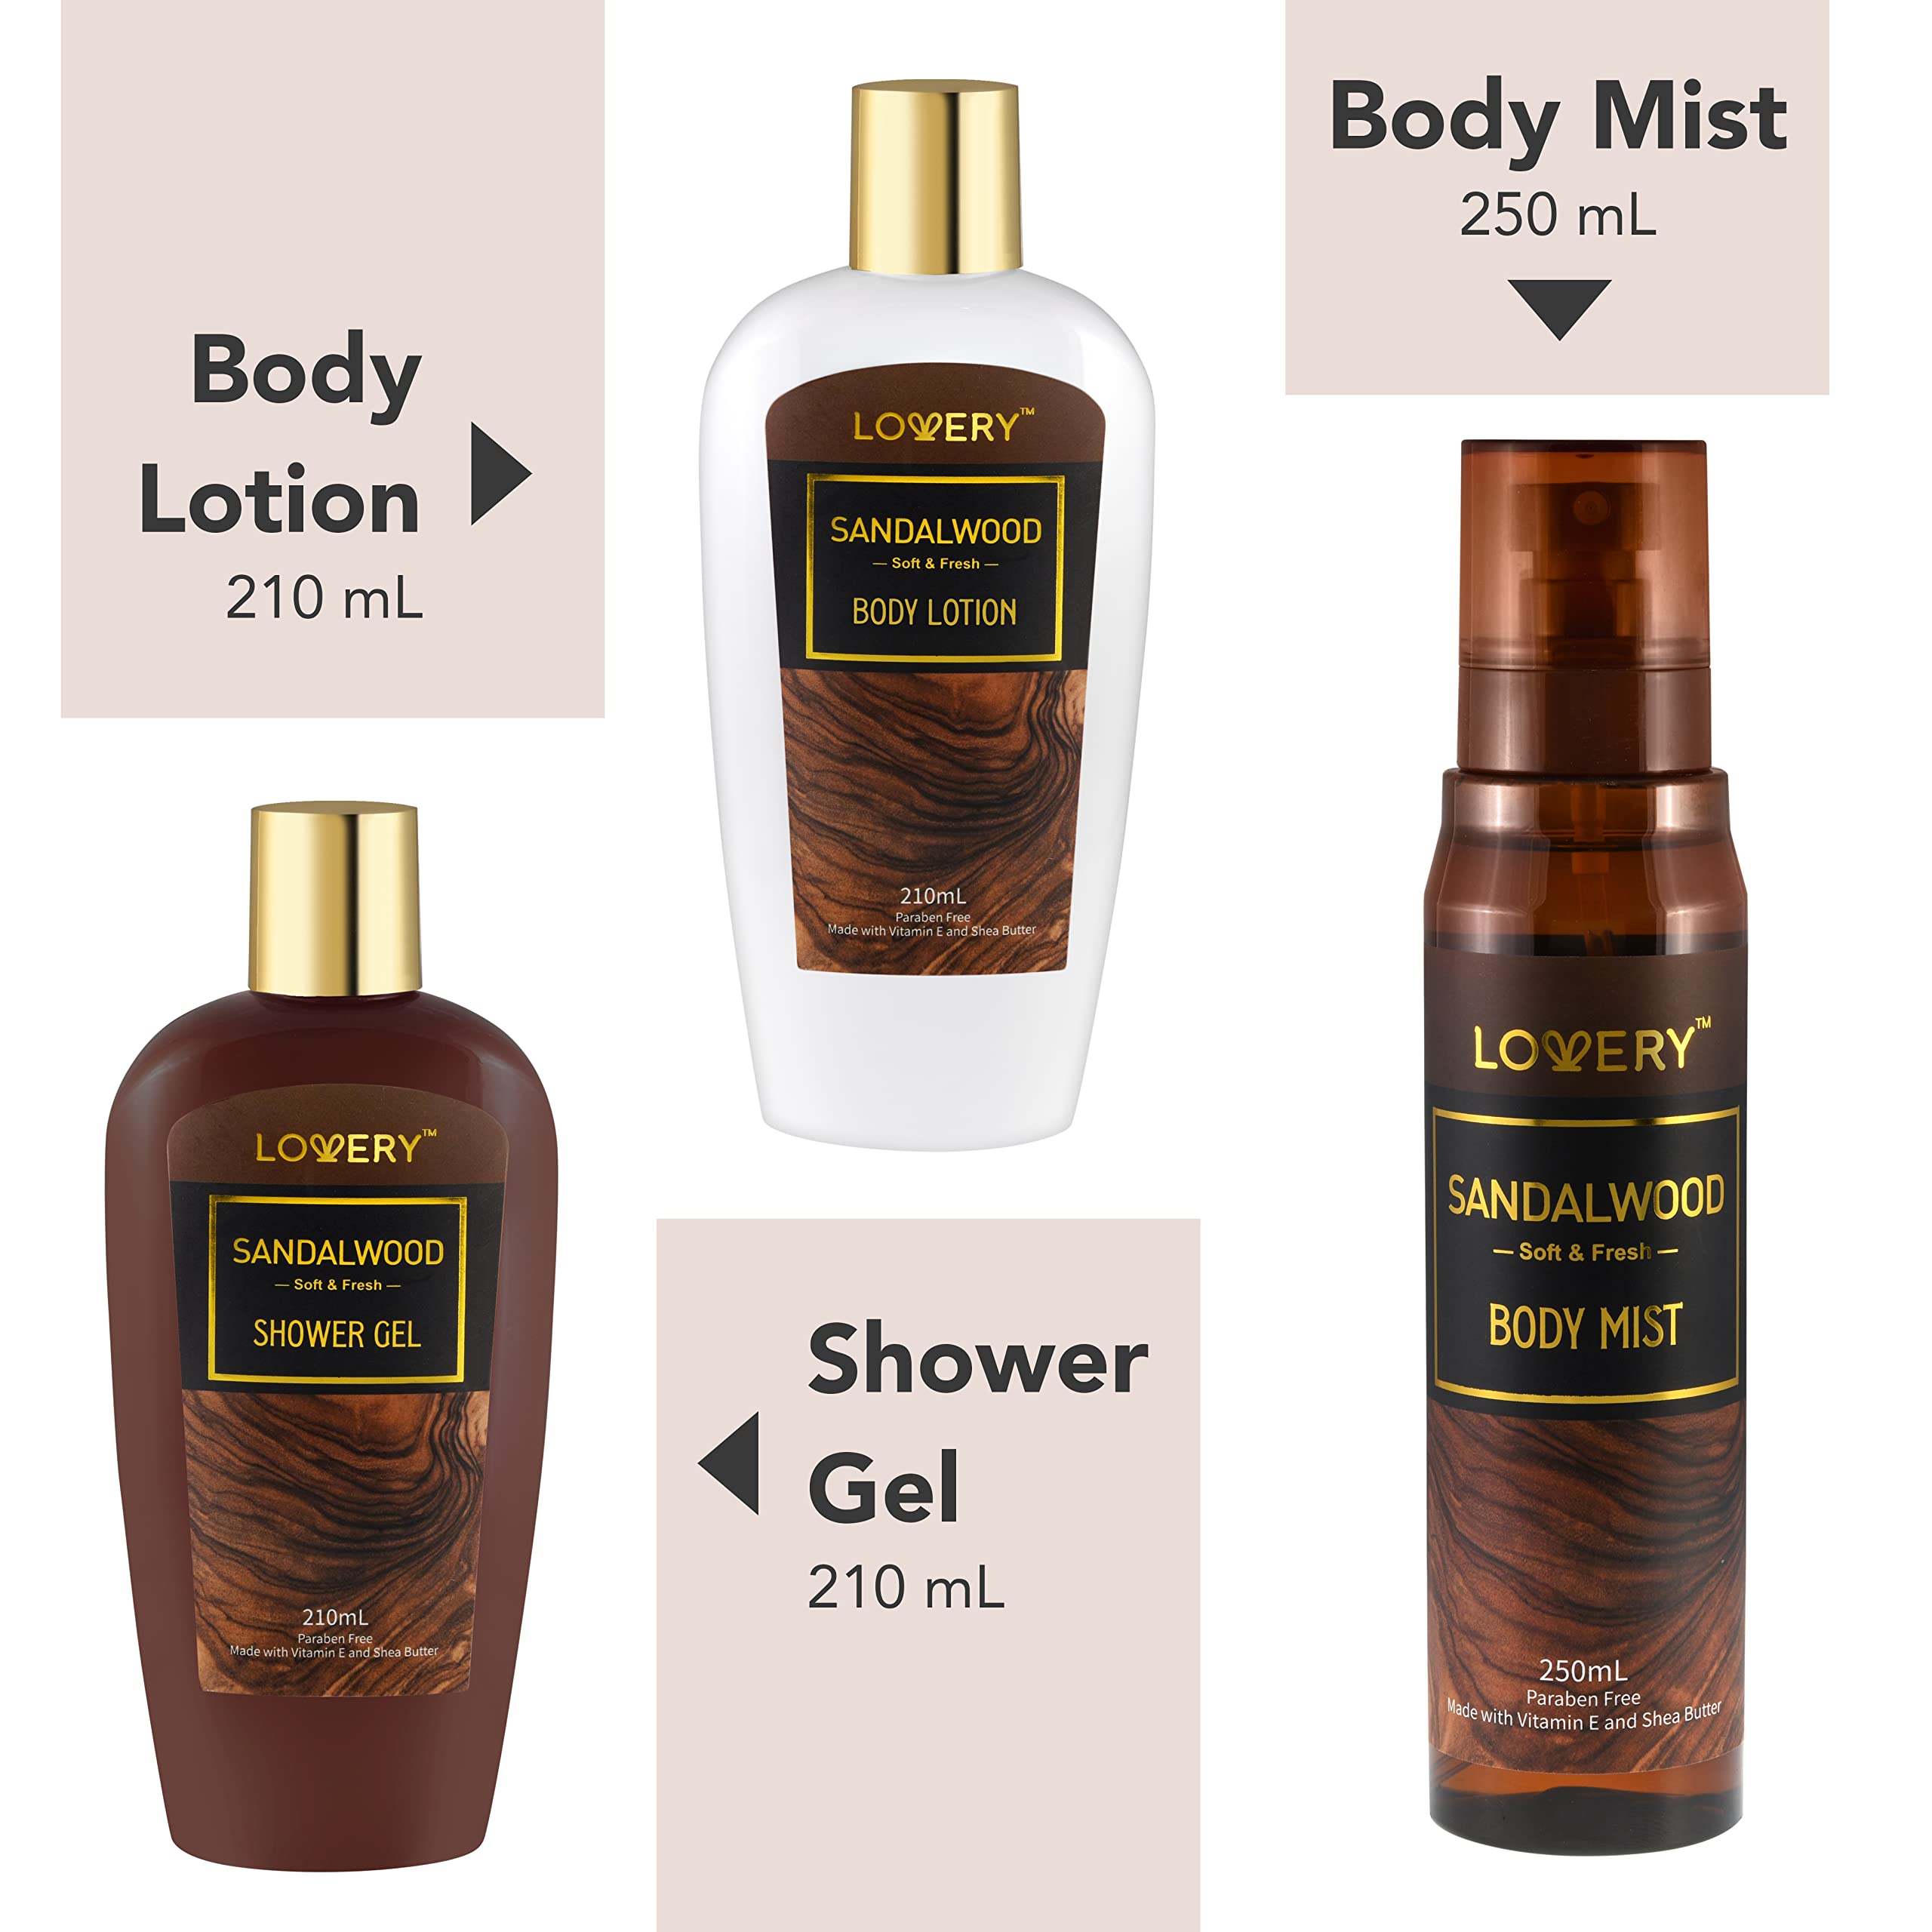 Bath and Body Gift Set for Women & Men, Sandalwood Home Spa Set With Natural Extracts, Vitamin E, Shea Butter - Shower Gel, Body Lotion, Body Mist, Personal Self Care Kit & Body Care Travel Set